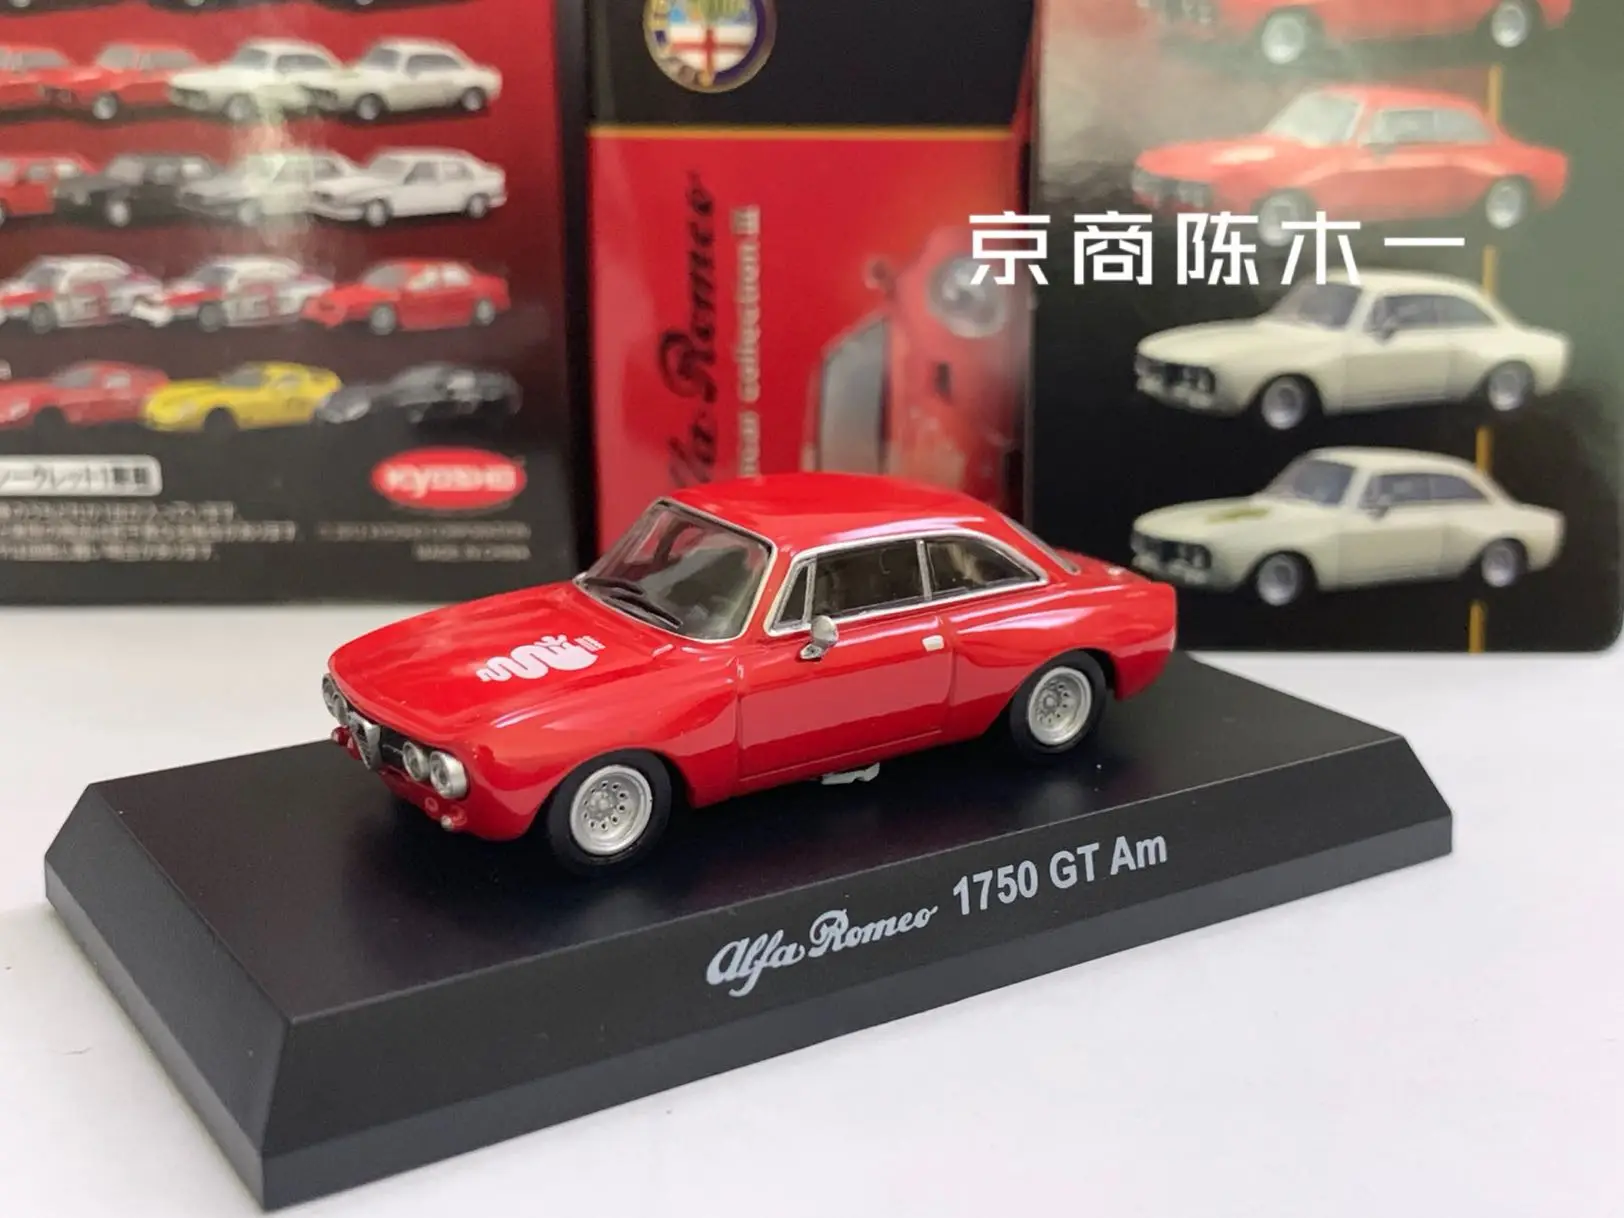 

1/64 KYOSHO Alfa Romeo 1750 GT AM LM F1 RACING Collection of die-cast alloy car decoration model toys